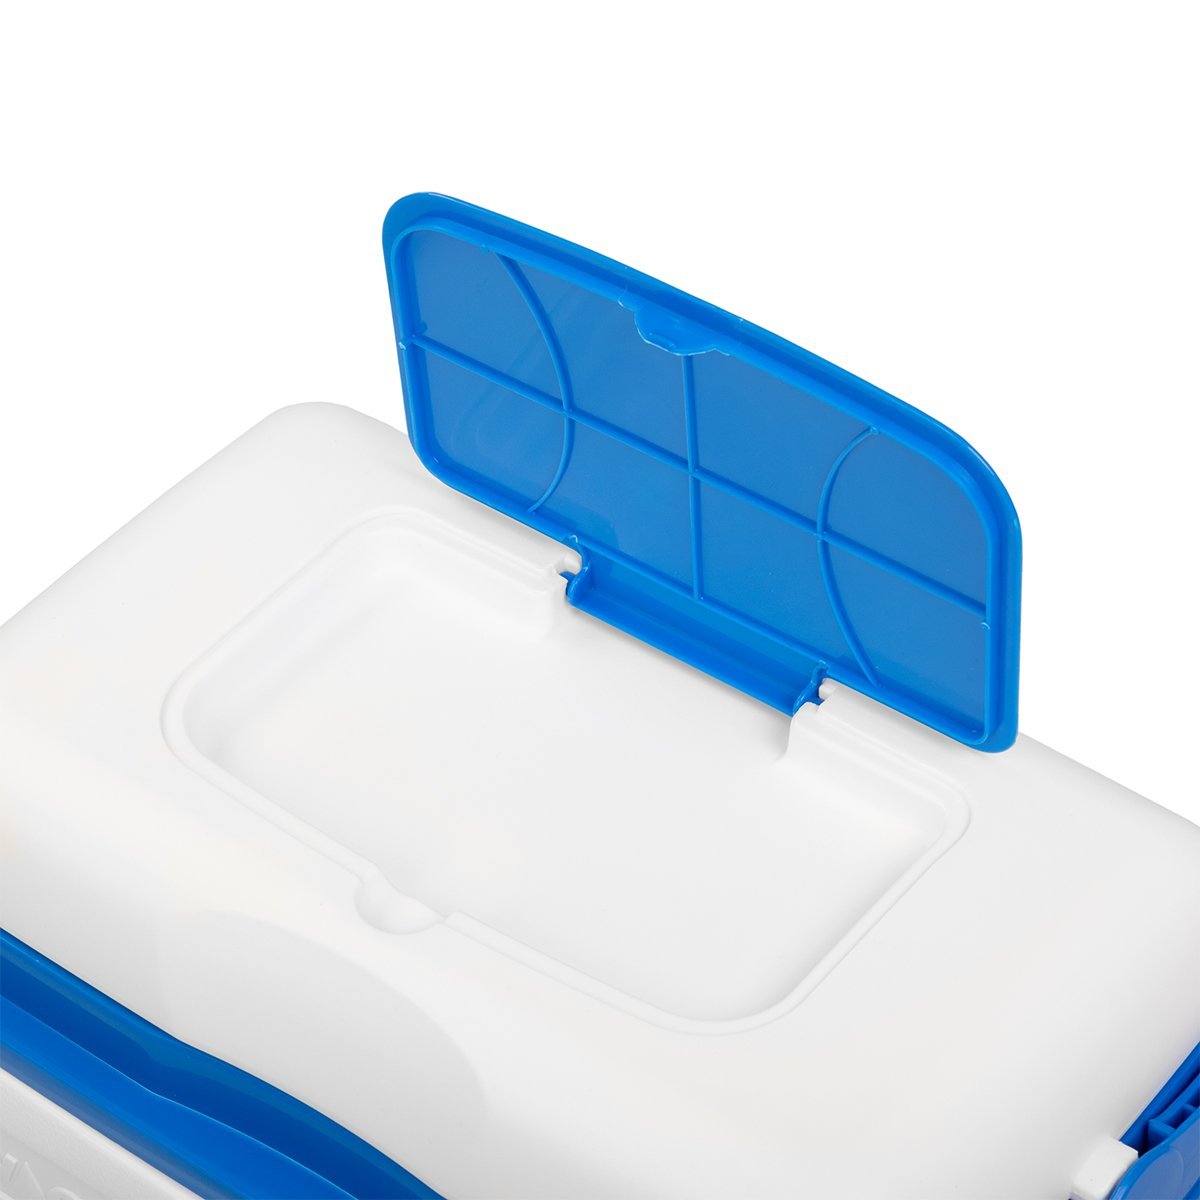 Voyager Portable Camping Ice Chest with Lid Storage Space